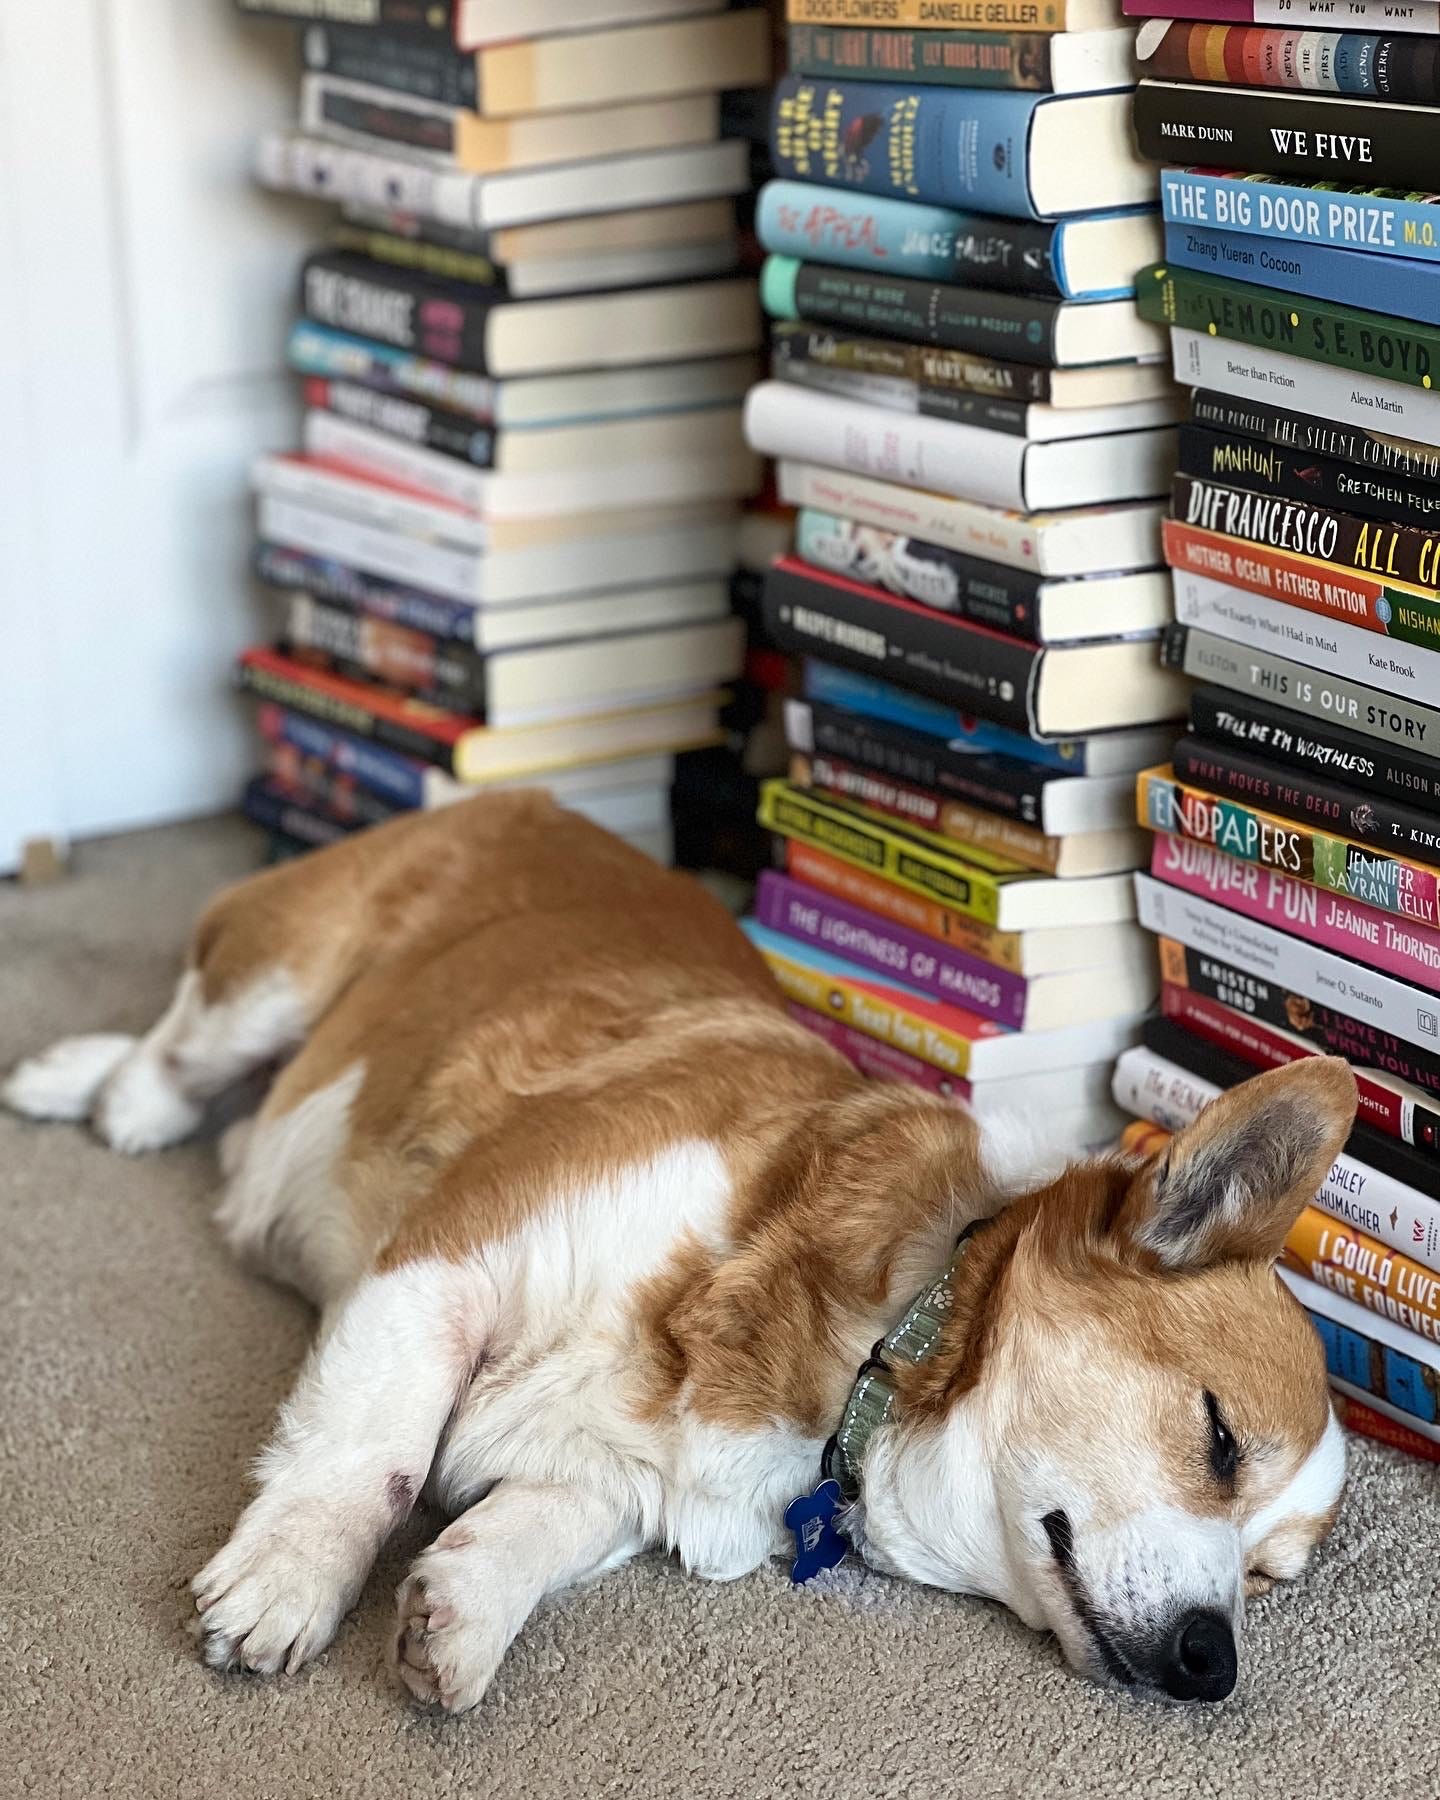 A red and white corgi asleep on his side in front of stacks of books.